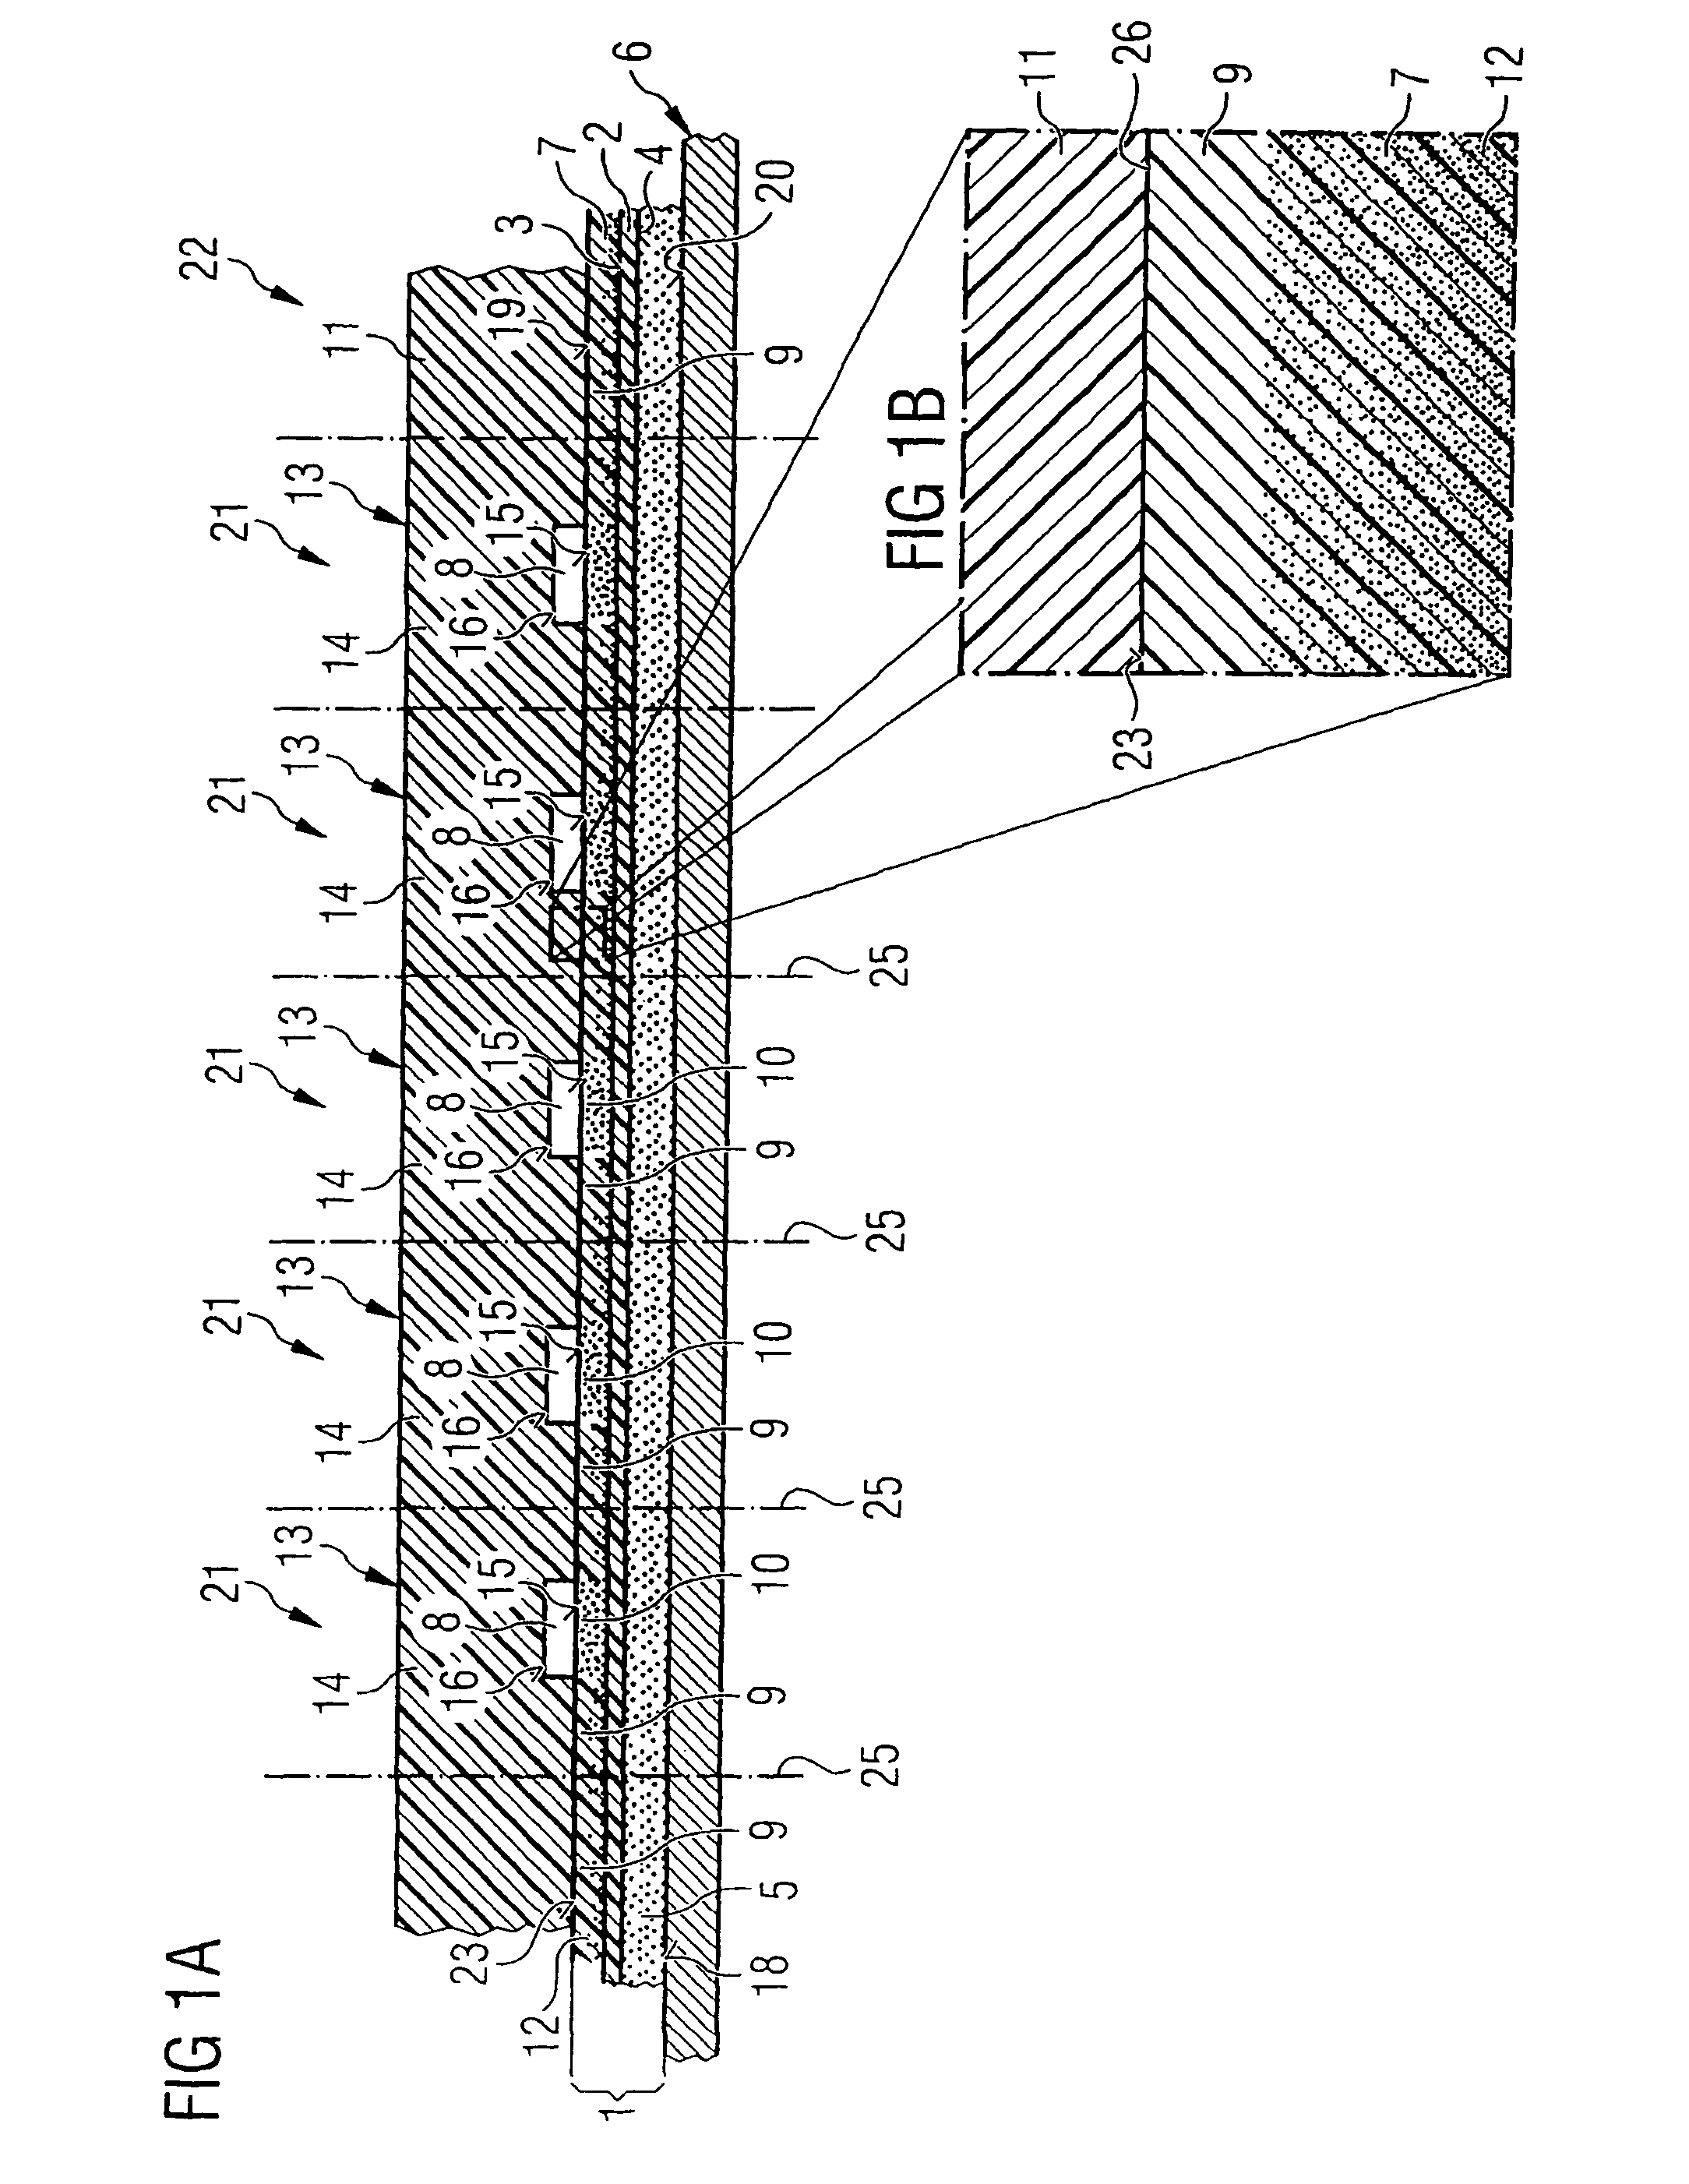 Carrier sheet with adhesive film and method for producing semiconductor devices using the carrier sheet with adhesive film